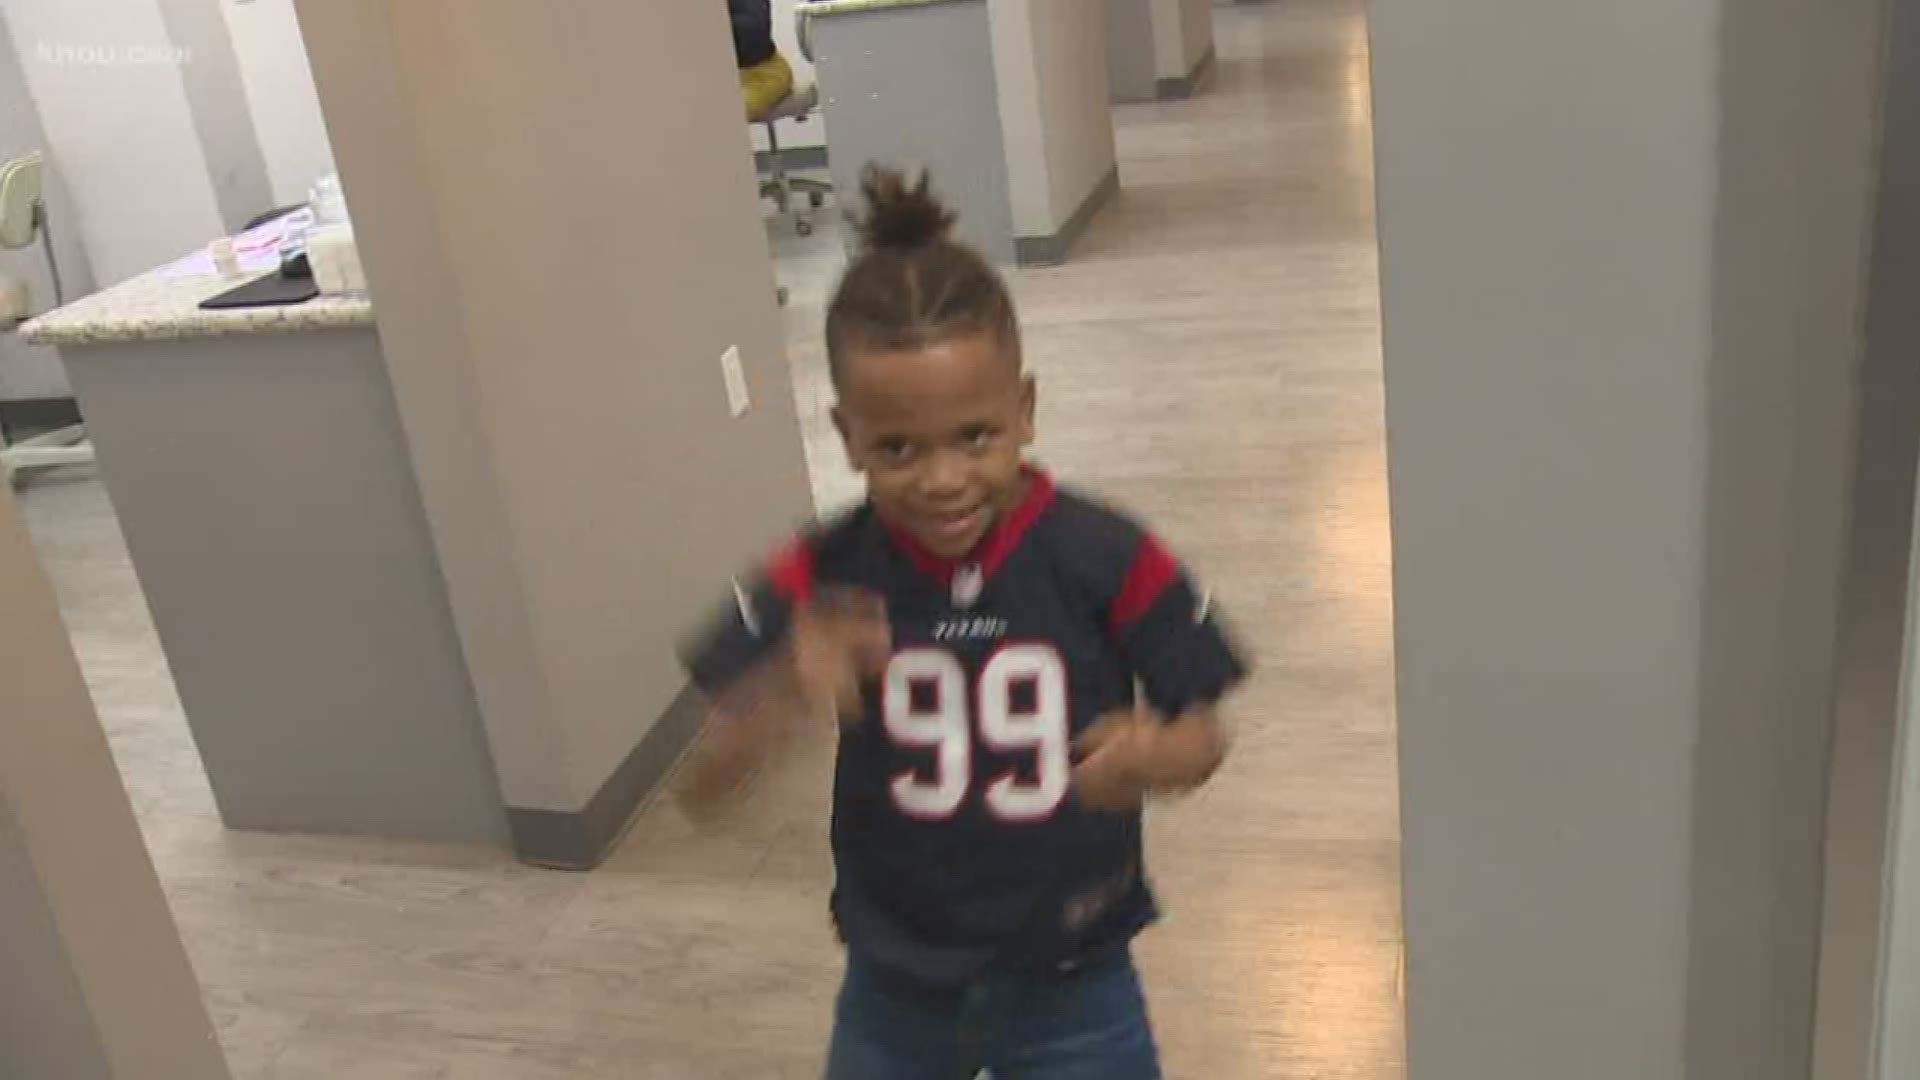 6-year-old Logan Cumby has become an internet star thanks to video of his hilarious reaction to the Texans comeback win over the Bills.